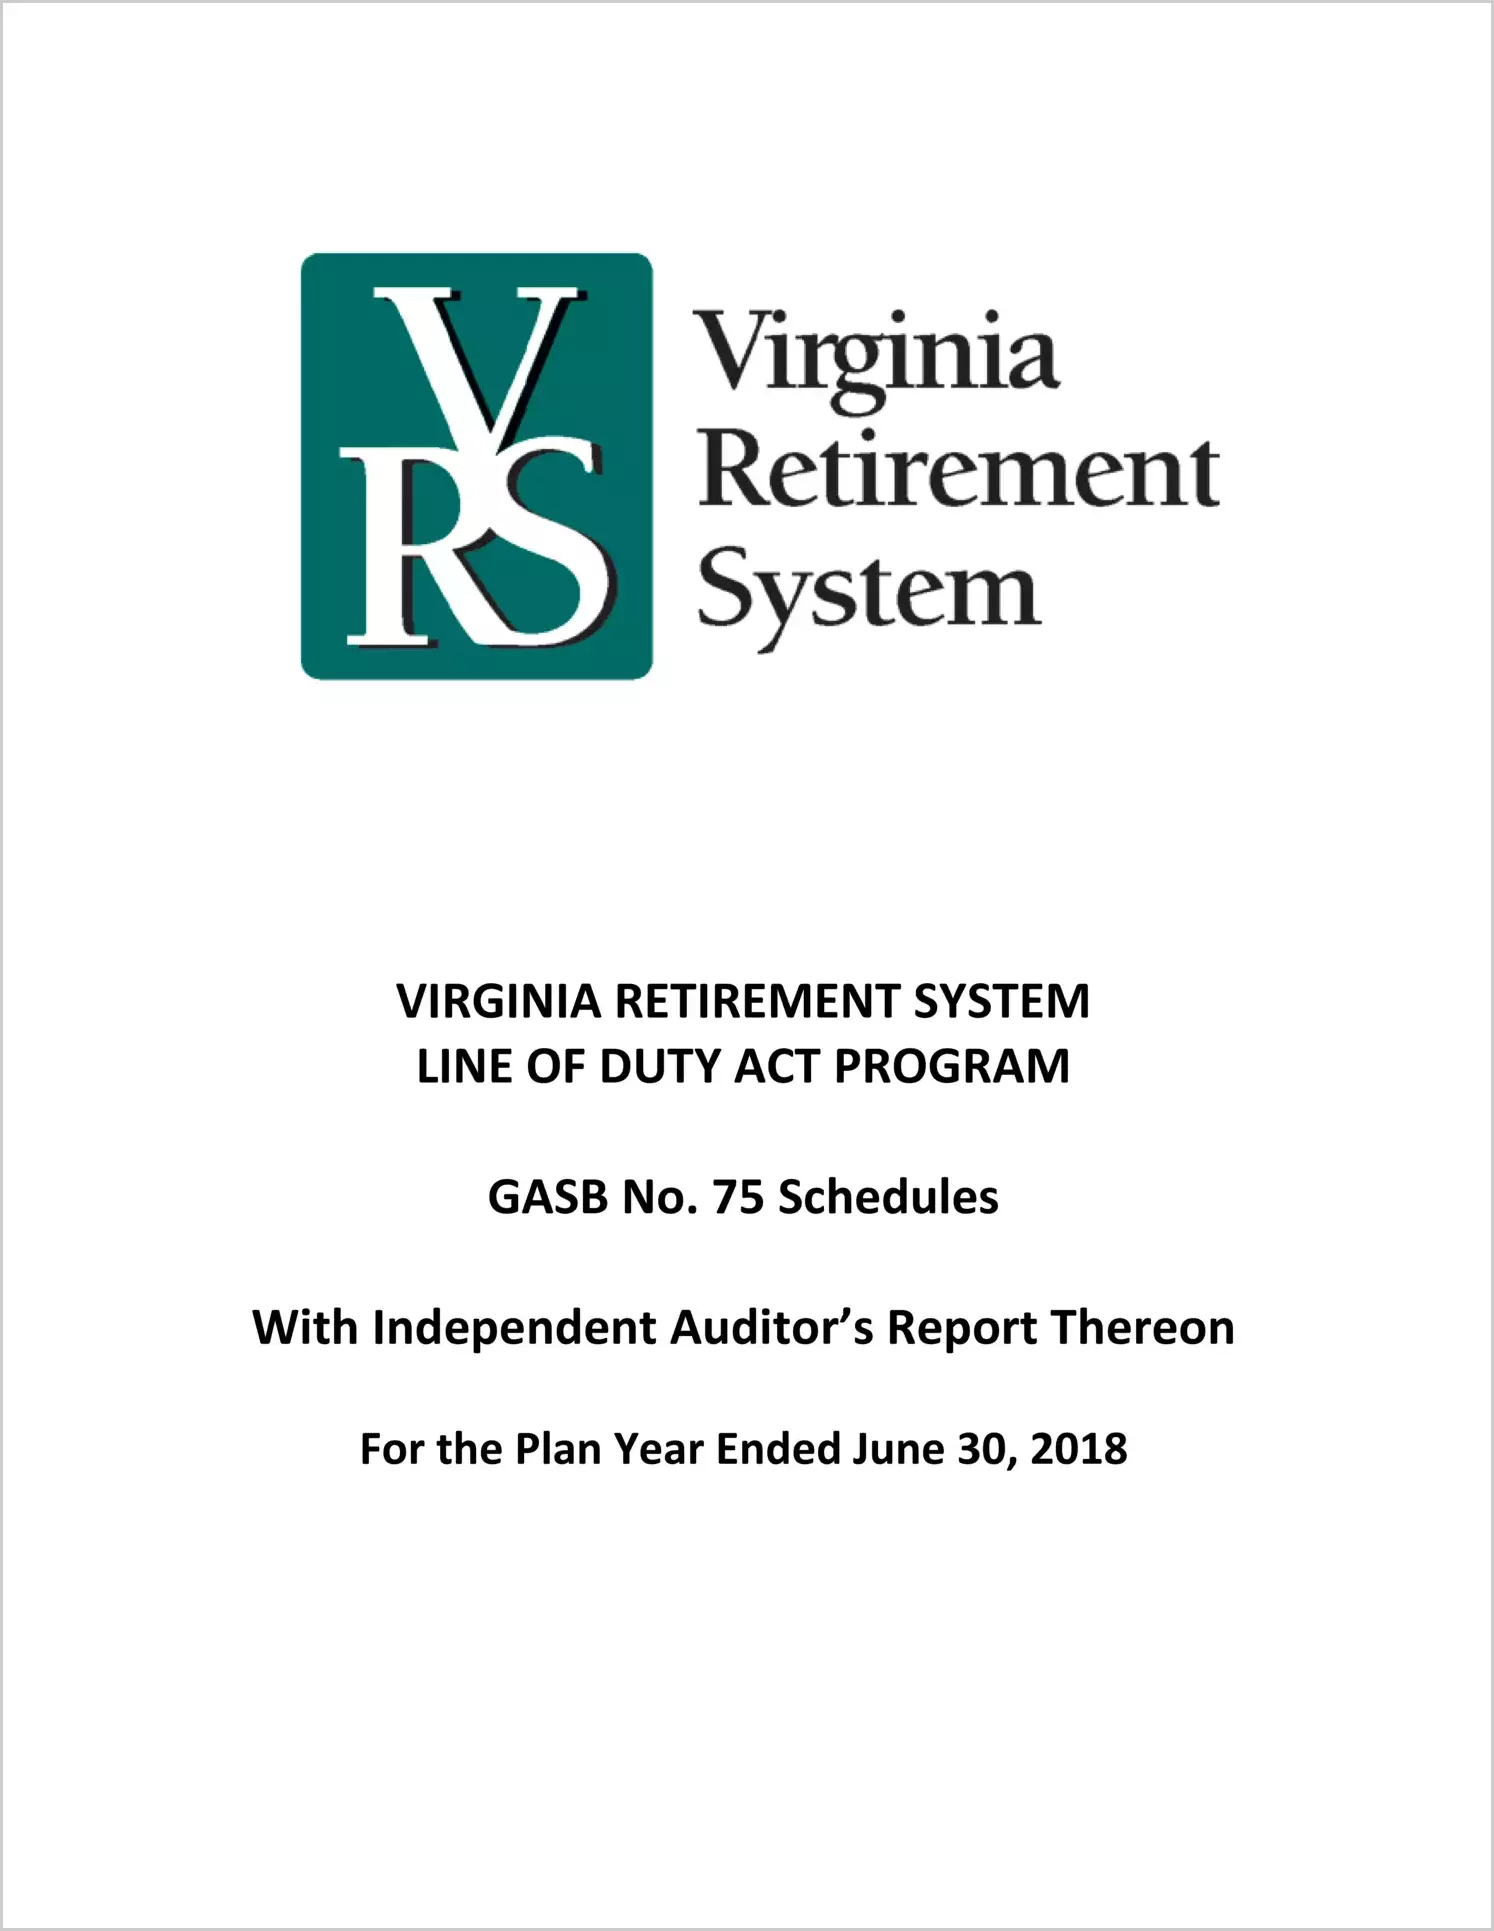 GASB 75 Schedule - Virginia Retirement System Line of Duty Act Program for the plan year ended June 30, 2018